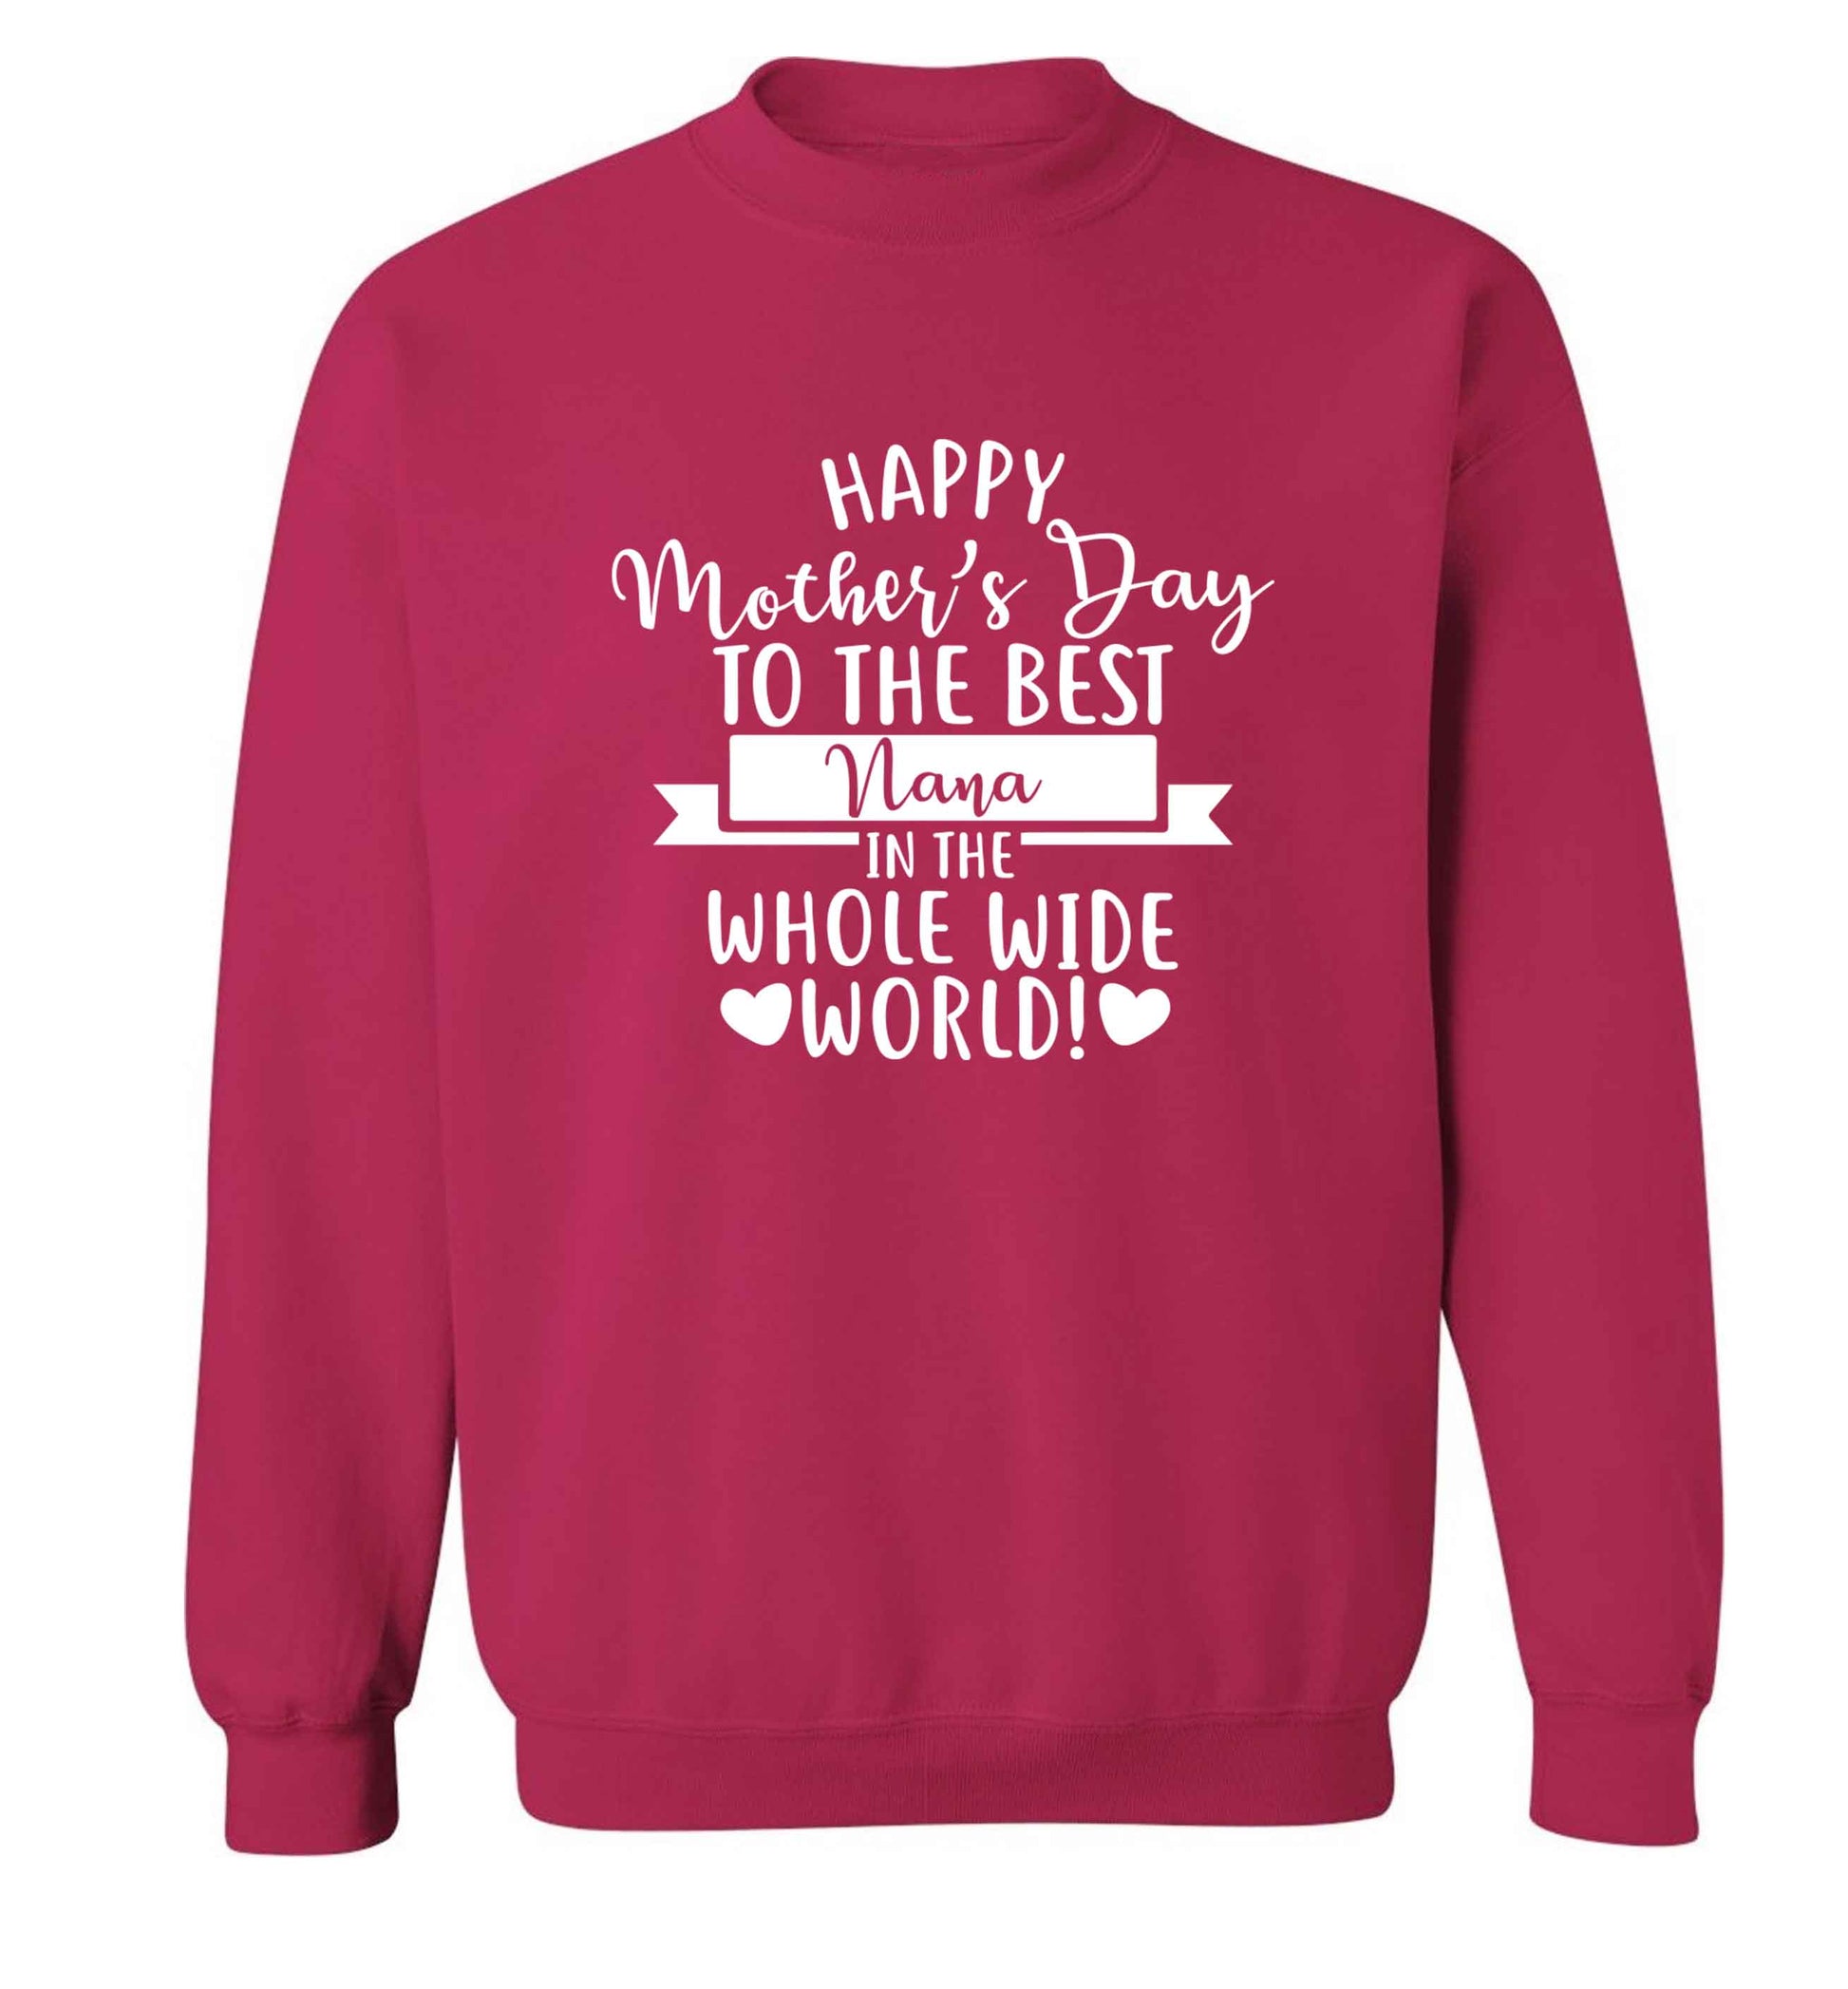 Happy mother's day to the best nana in the world adult's unisex pink sweater 2XL